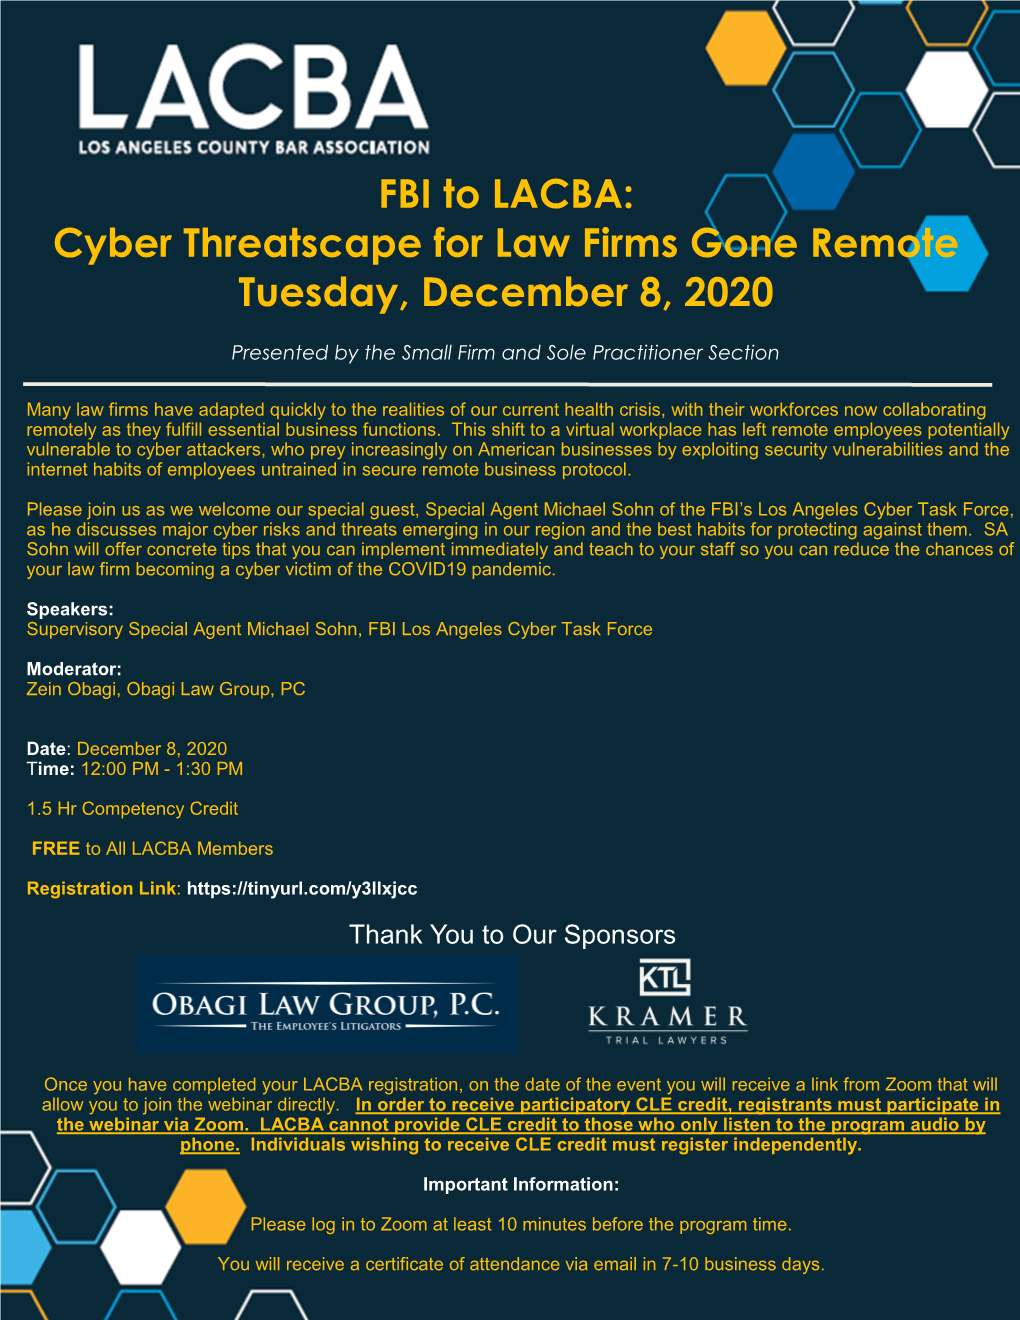 FBI to LACBA: Cyber Threatscape for Law Firms Gone Remote Tuesday, December 8, 2020